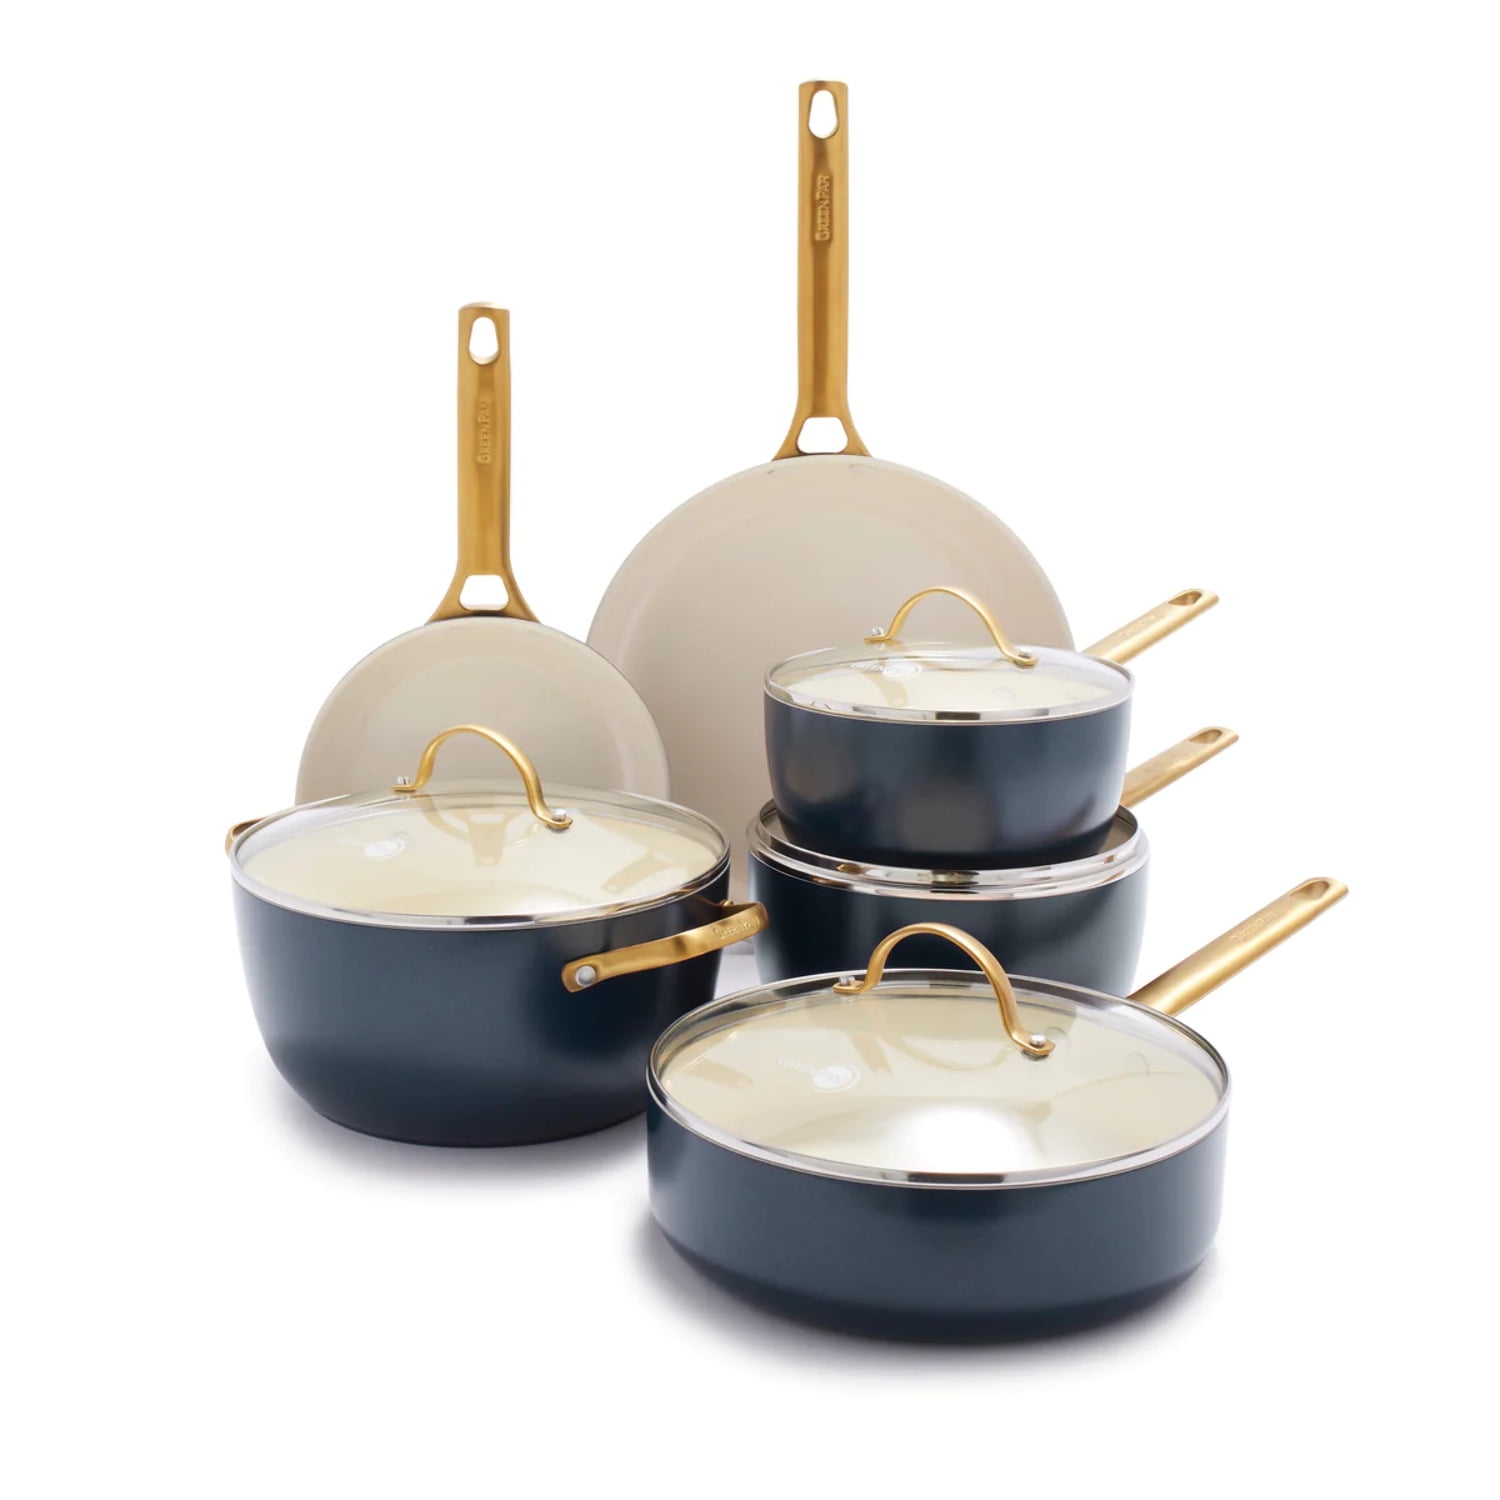 Reserve Ceramic Nonstick 10-Piece Cookware Set, Black with Gold-Tone